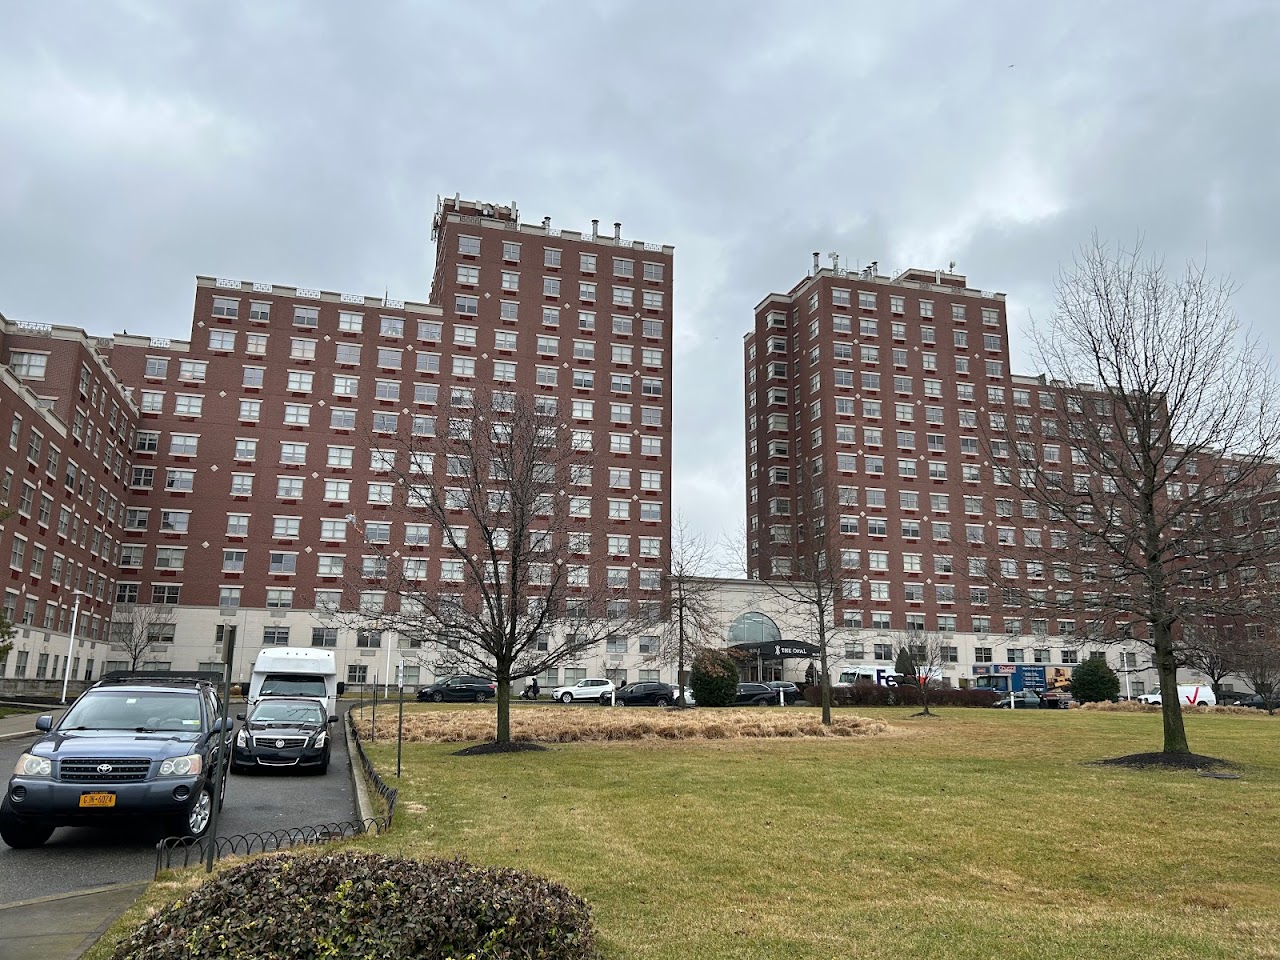 Photo of KEW GARDENS HILLS APTS. Affordable housing located at 7525 153RD ST FLUSHING, NY 11367